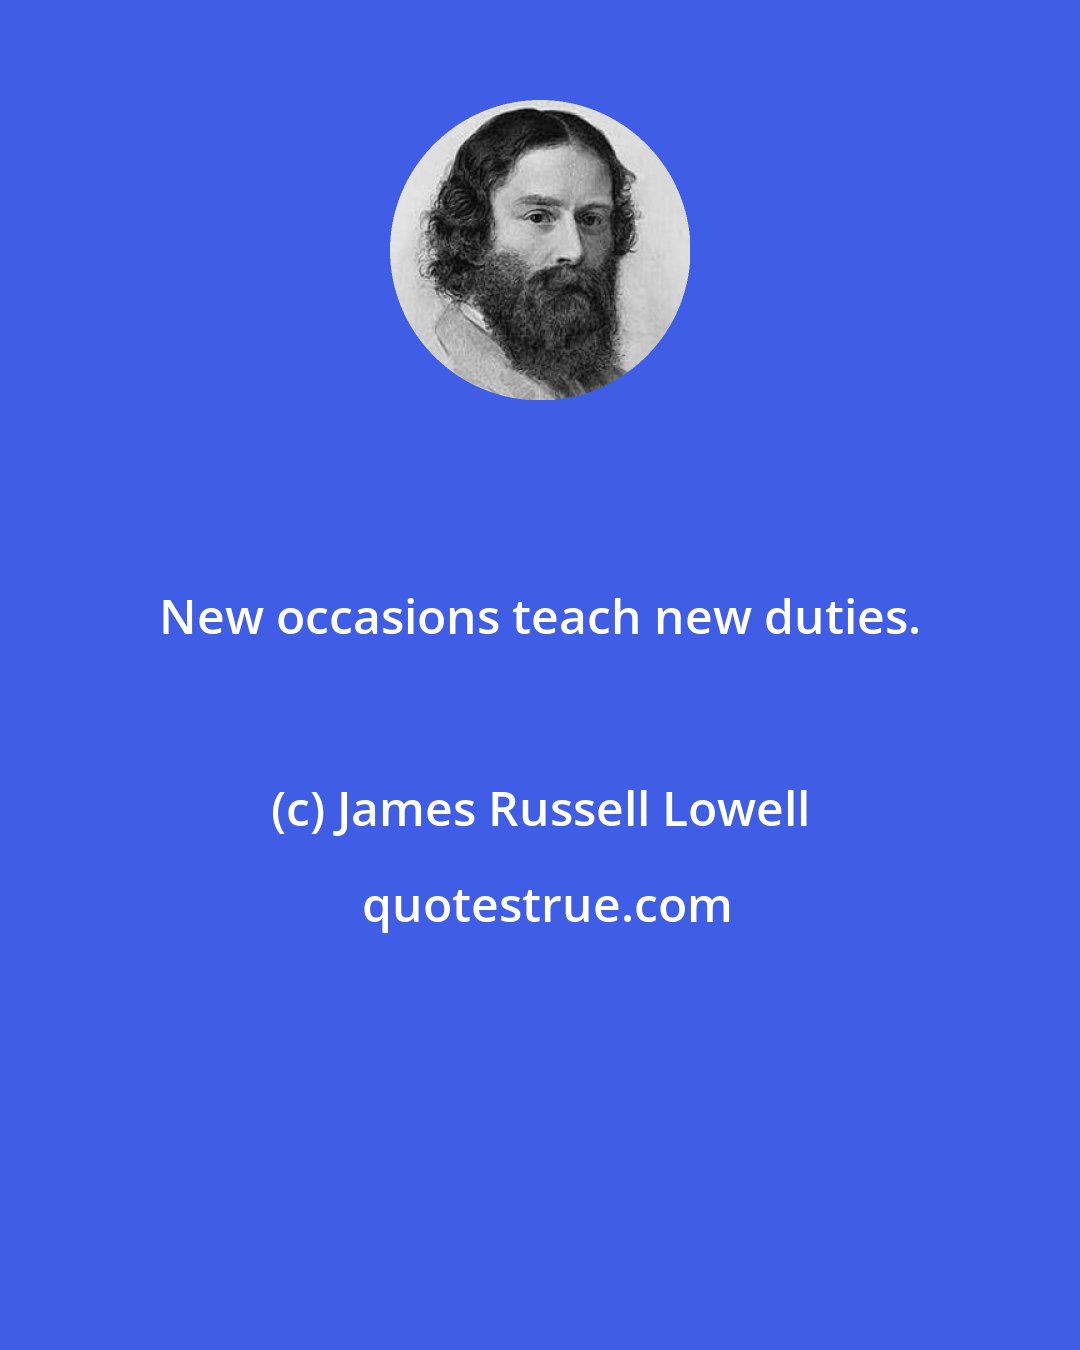 James Russell Lowell: New occasions teach new duties.